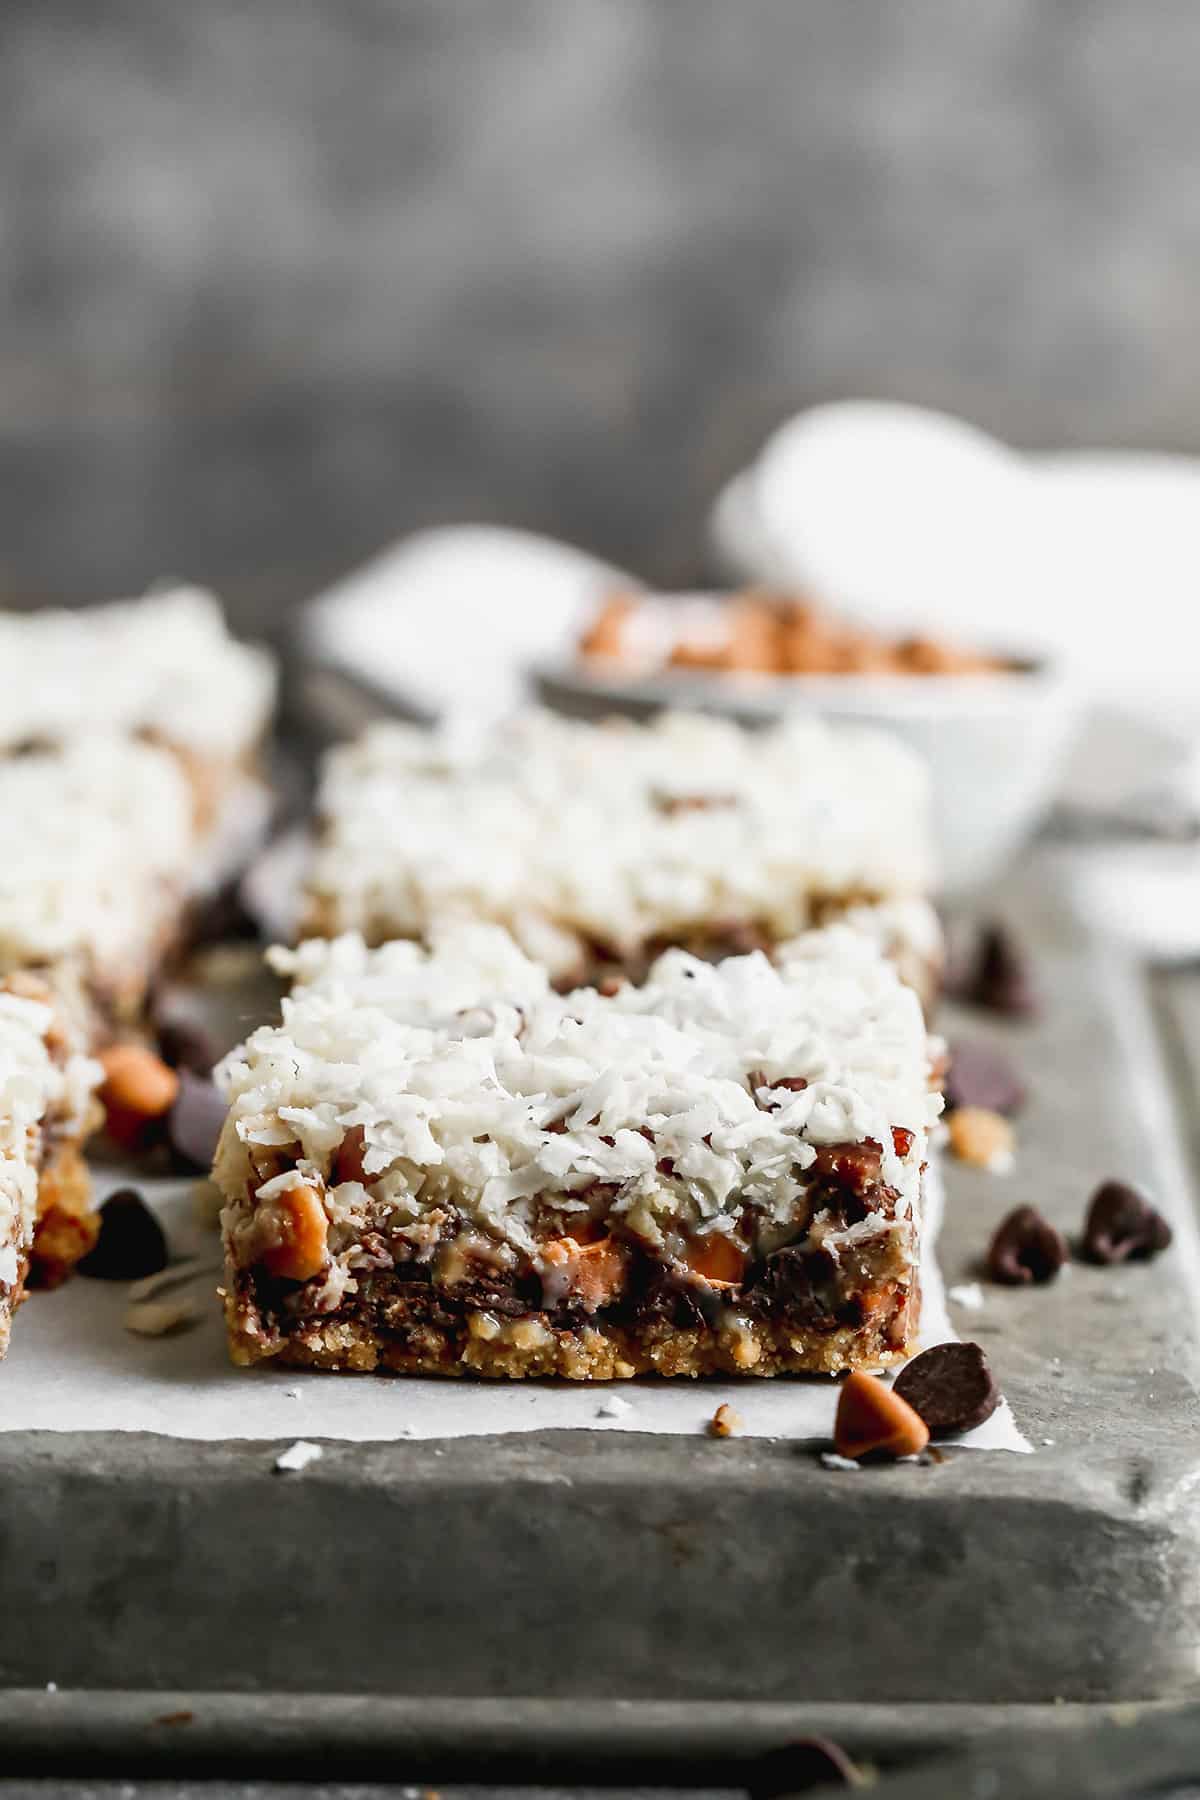 The best Magic Bars recipe cut into bars and placed on a baking sheet.